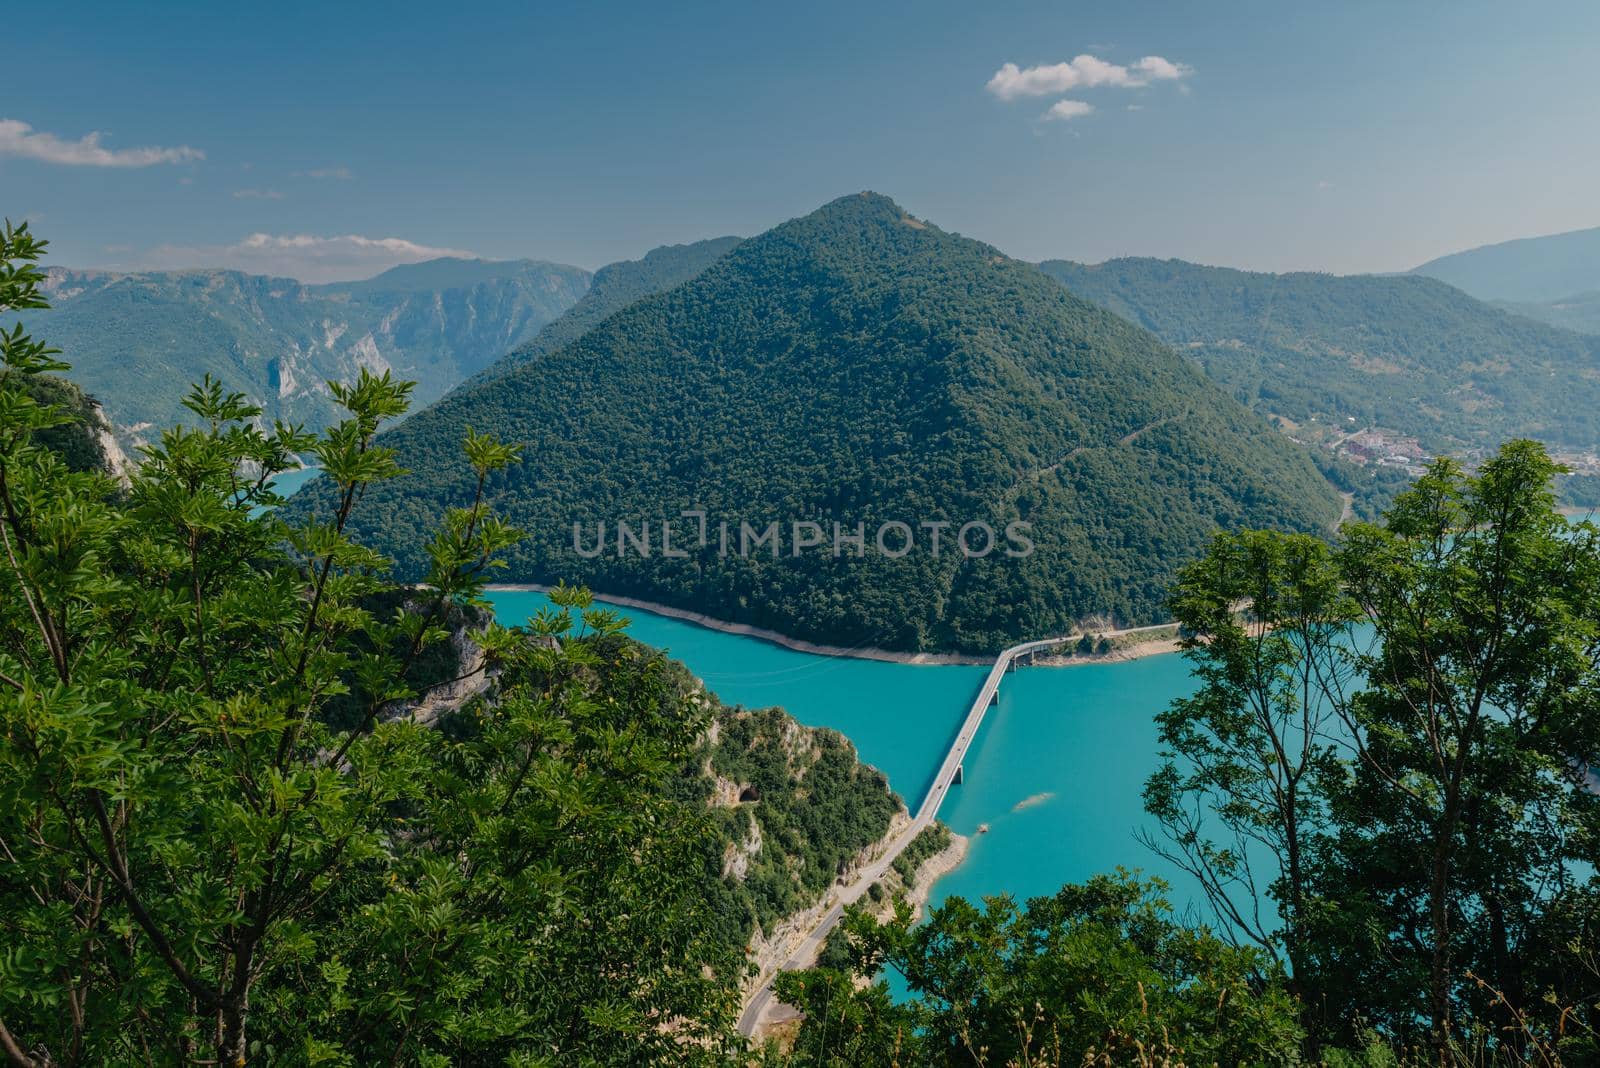 The concept of eco-tourism and active recreation. National Park. Mountain Emerald lake in the wooded mountains. Sunny day in autumn.